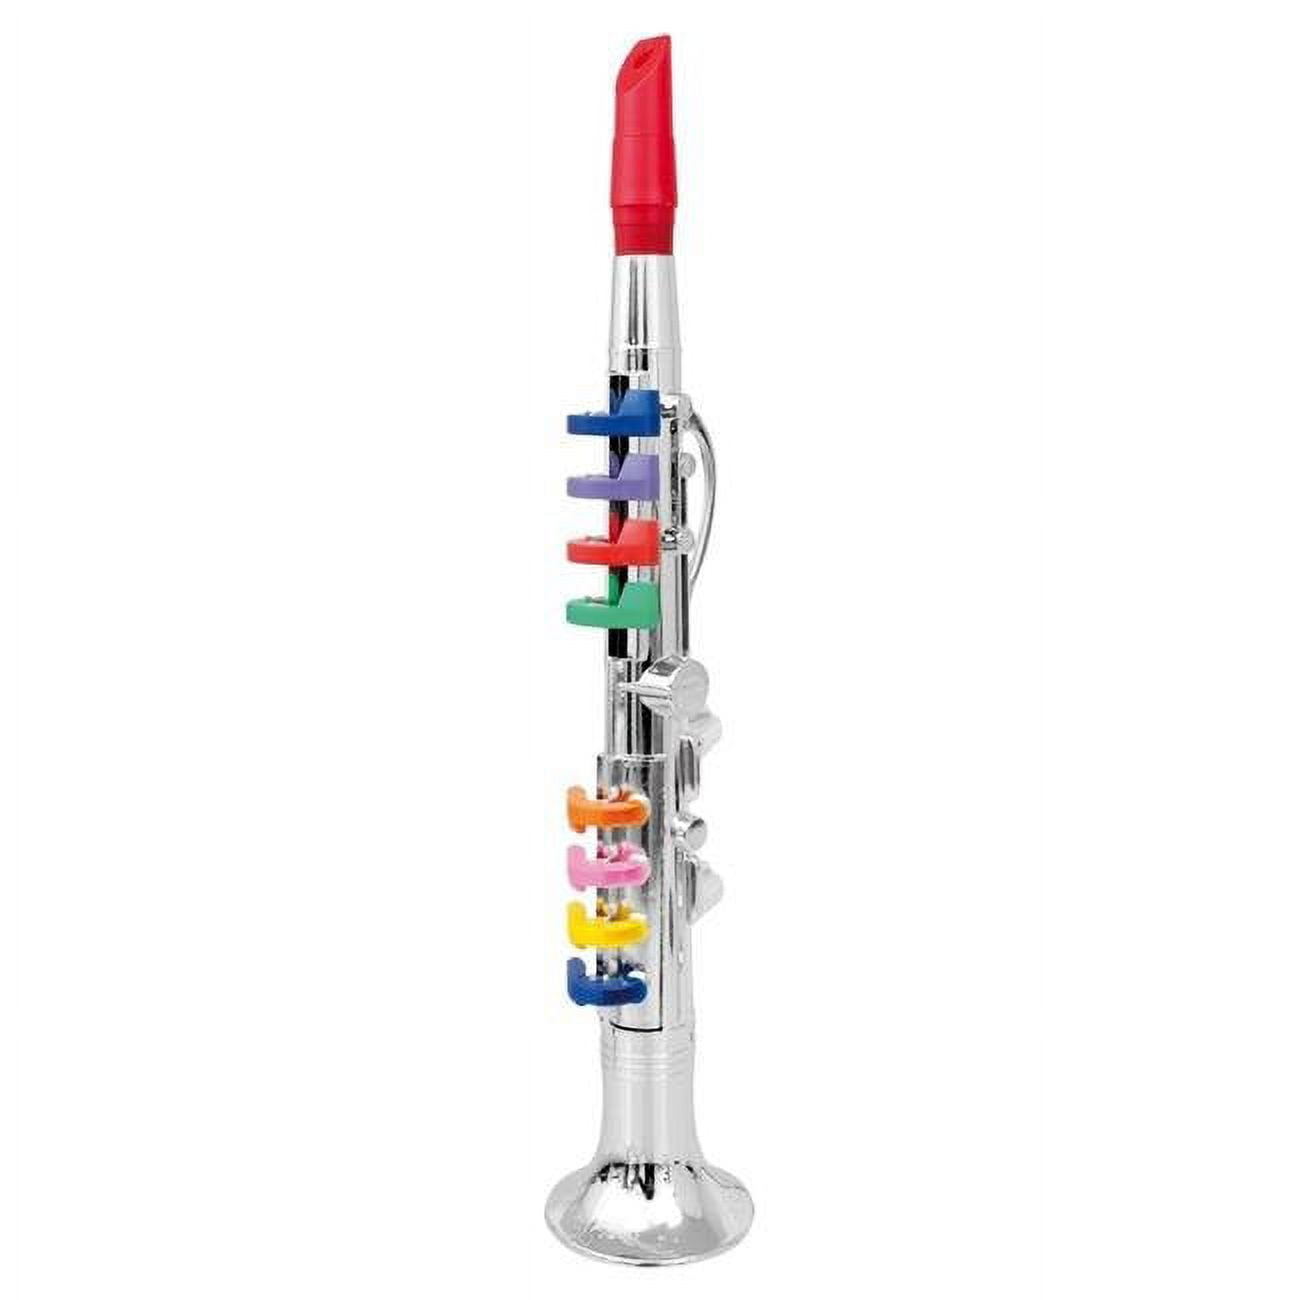 Clarinet With 8 Colored Keys, Metallic Silver